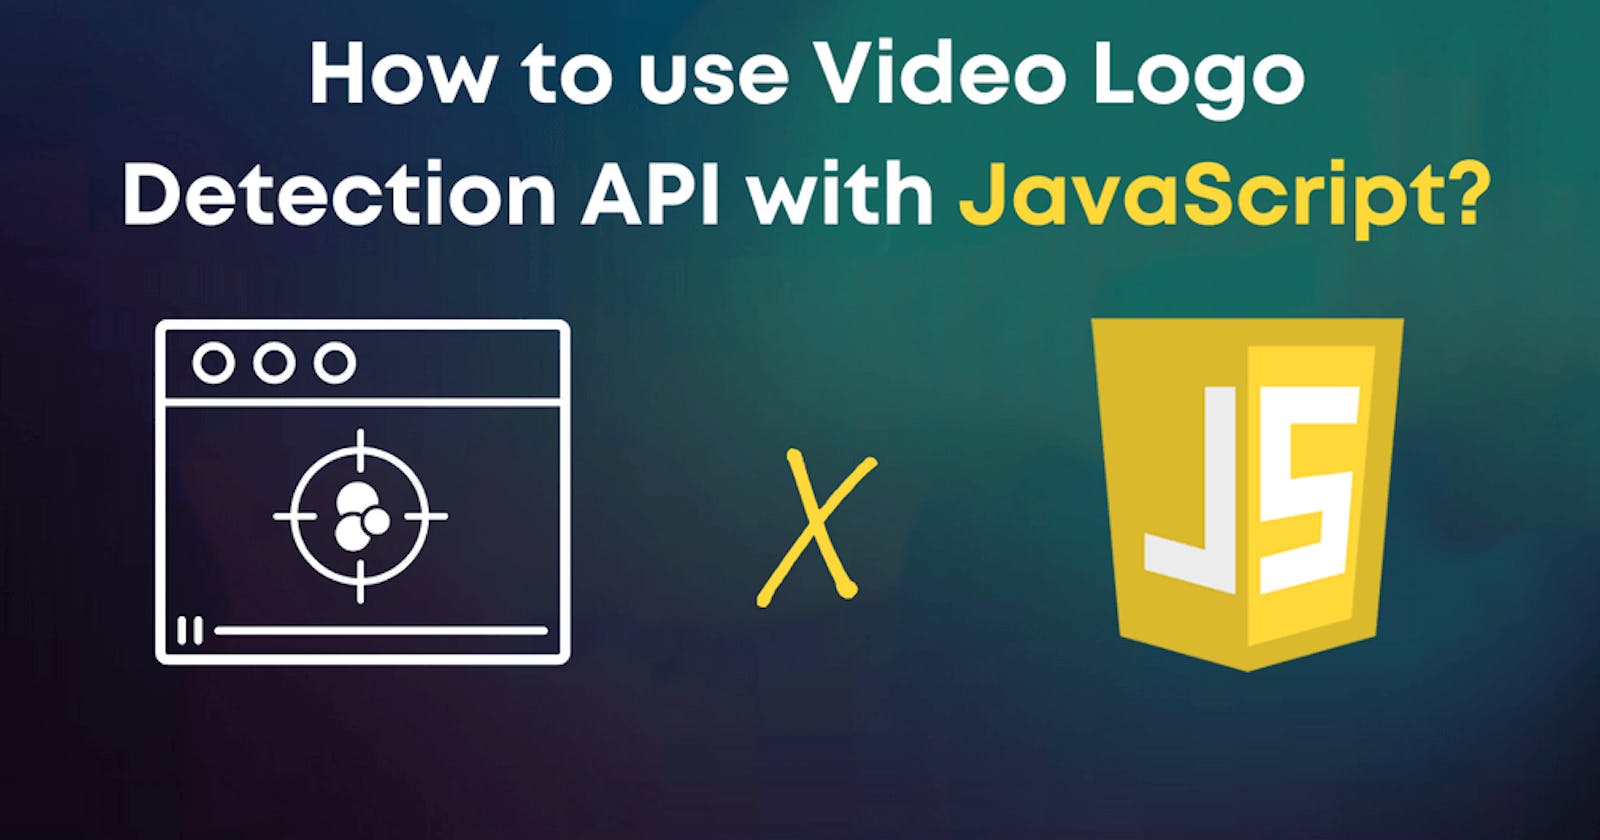 How to Detect and Localize Logos in a Video with JavaScript?